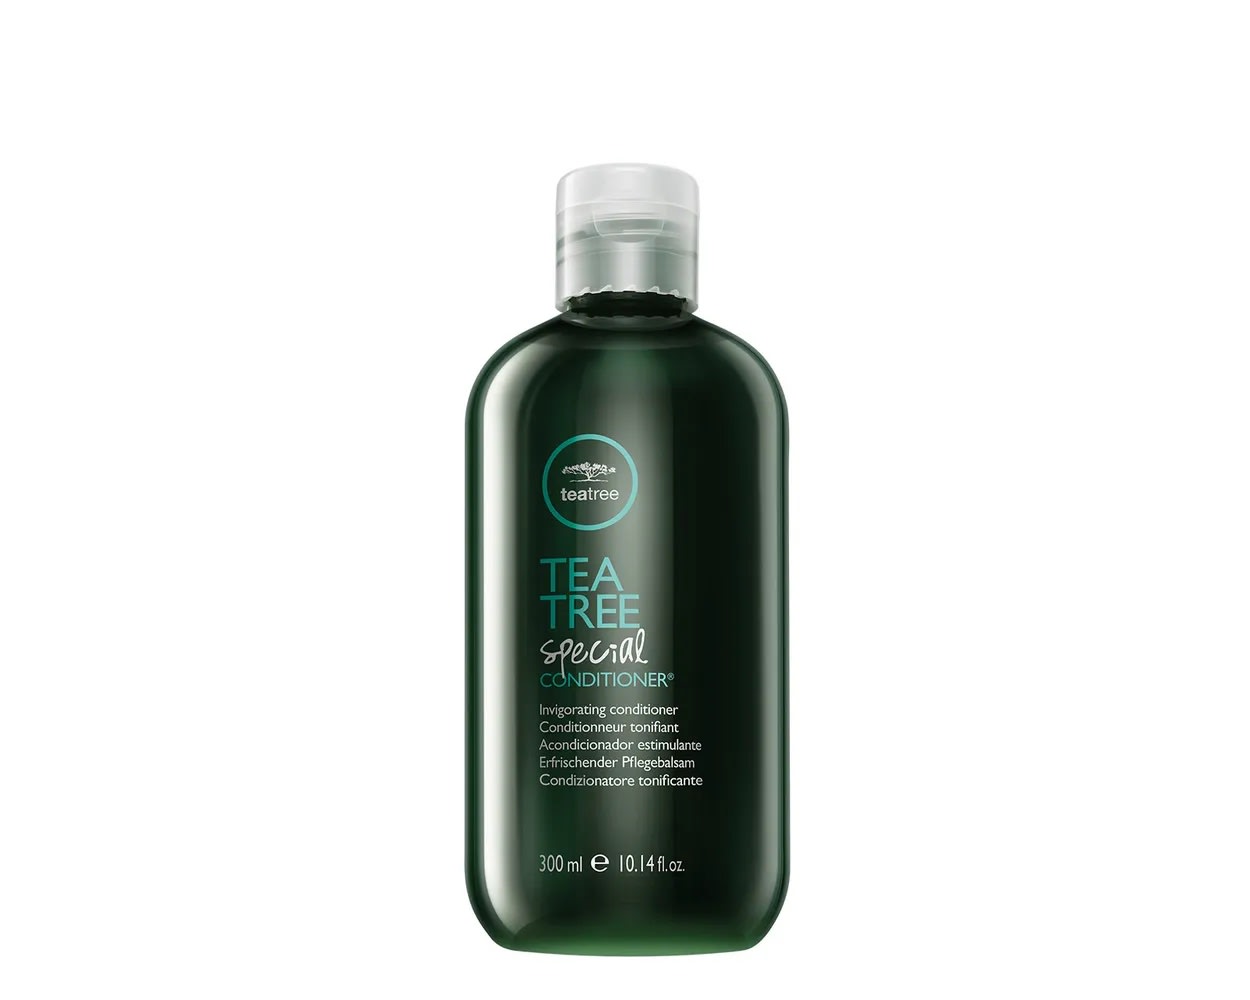 Paul Mitchell Special Tea Tree Conditioner